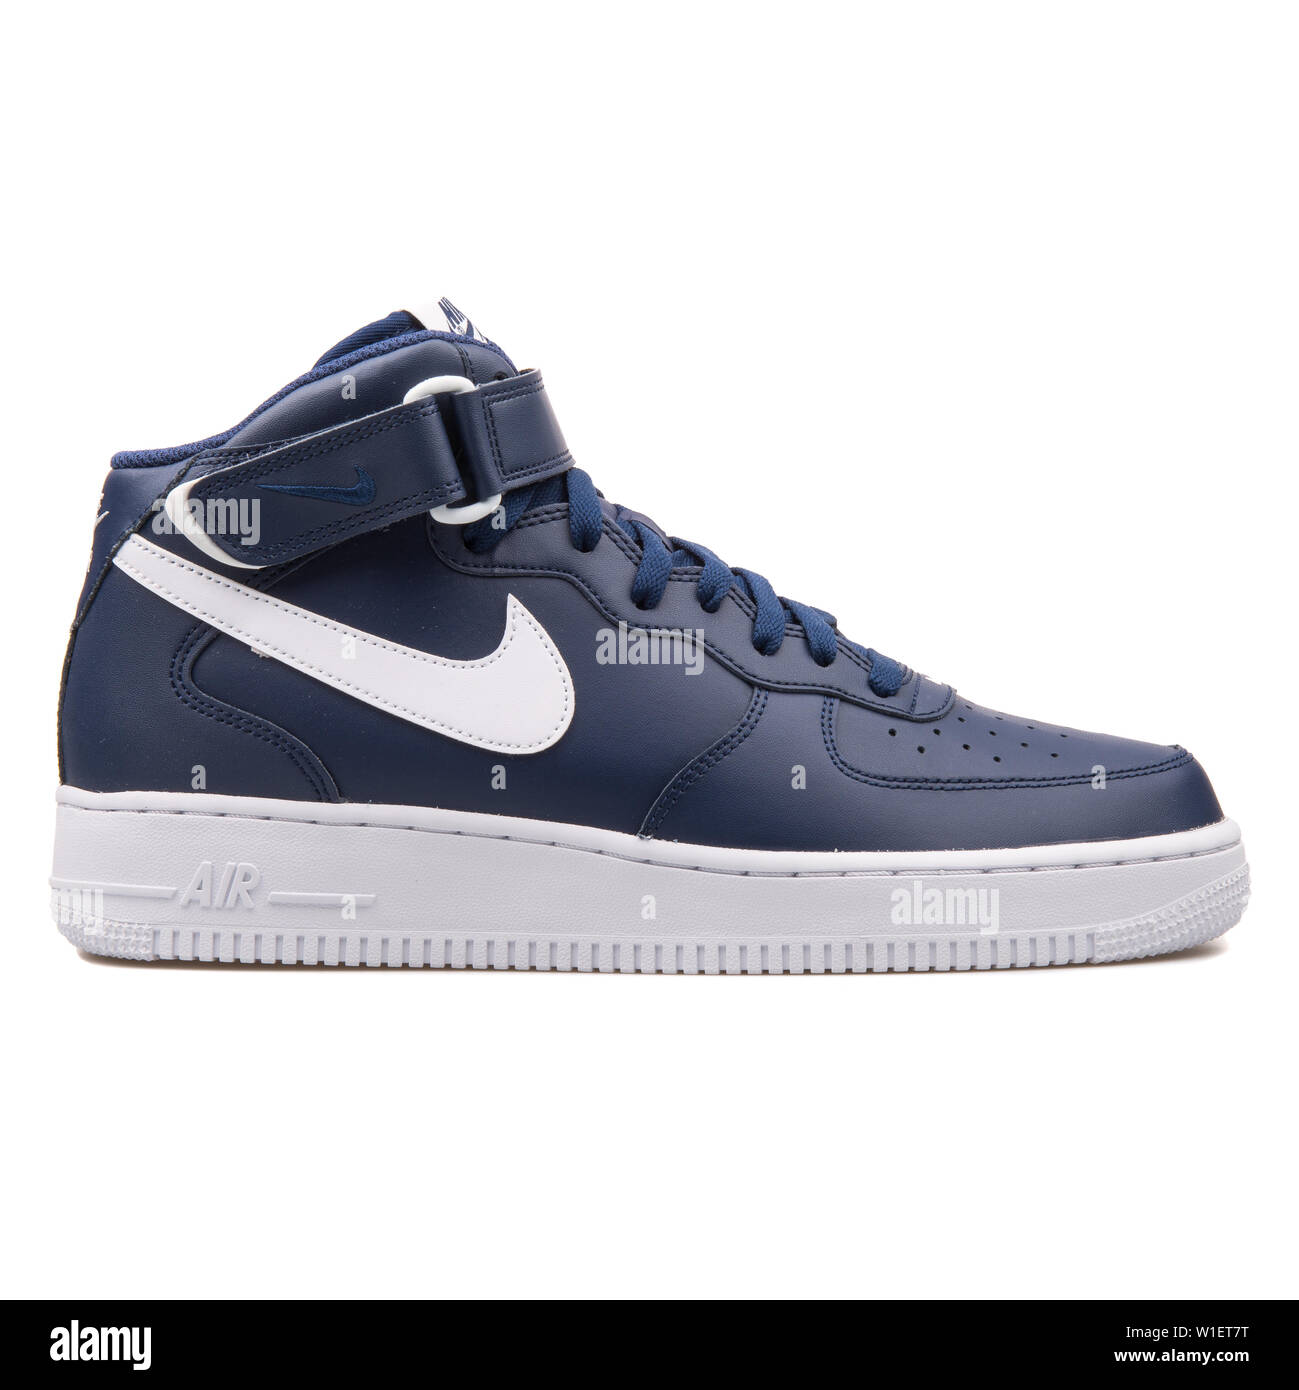 VIENNA, AUSTRIA - AUGUST 10, 2017: Nike Air Force 1 Mid 07 blue and white  sneaker on white background Stock Photo - Alamy